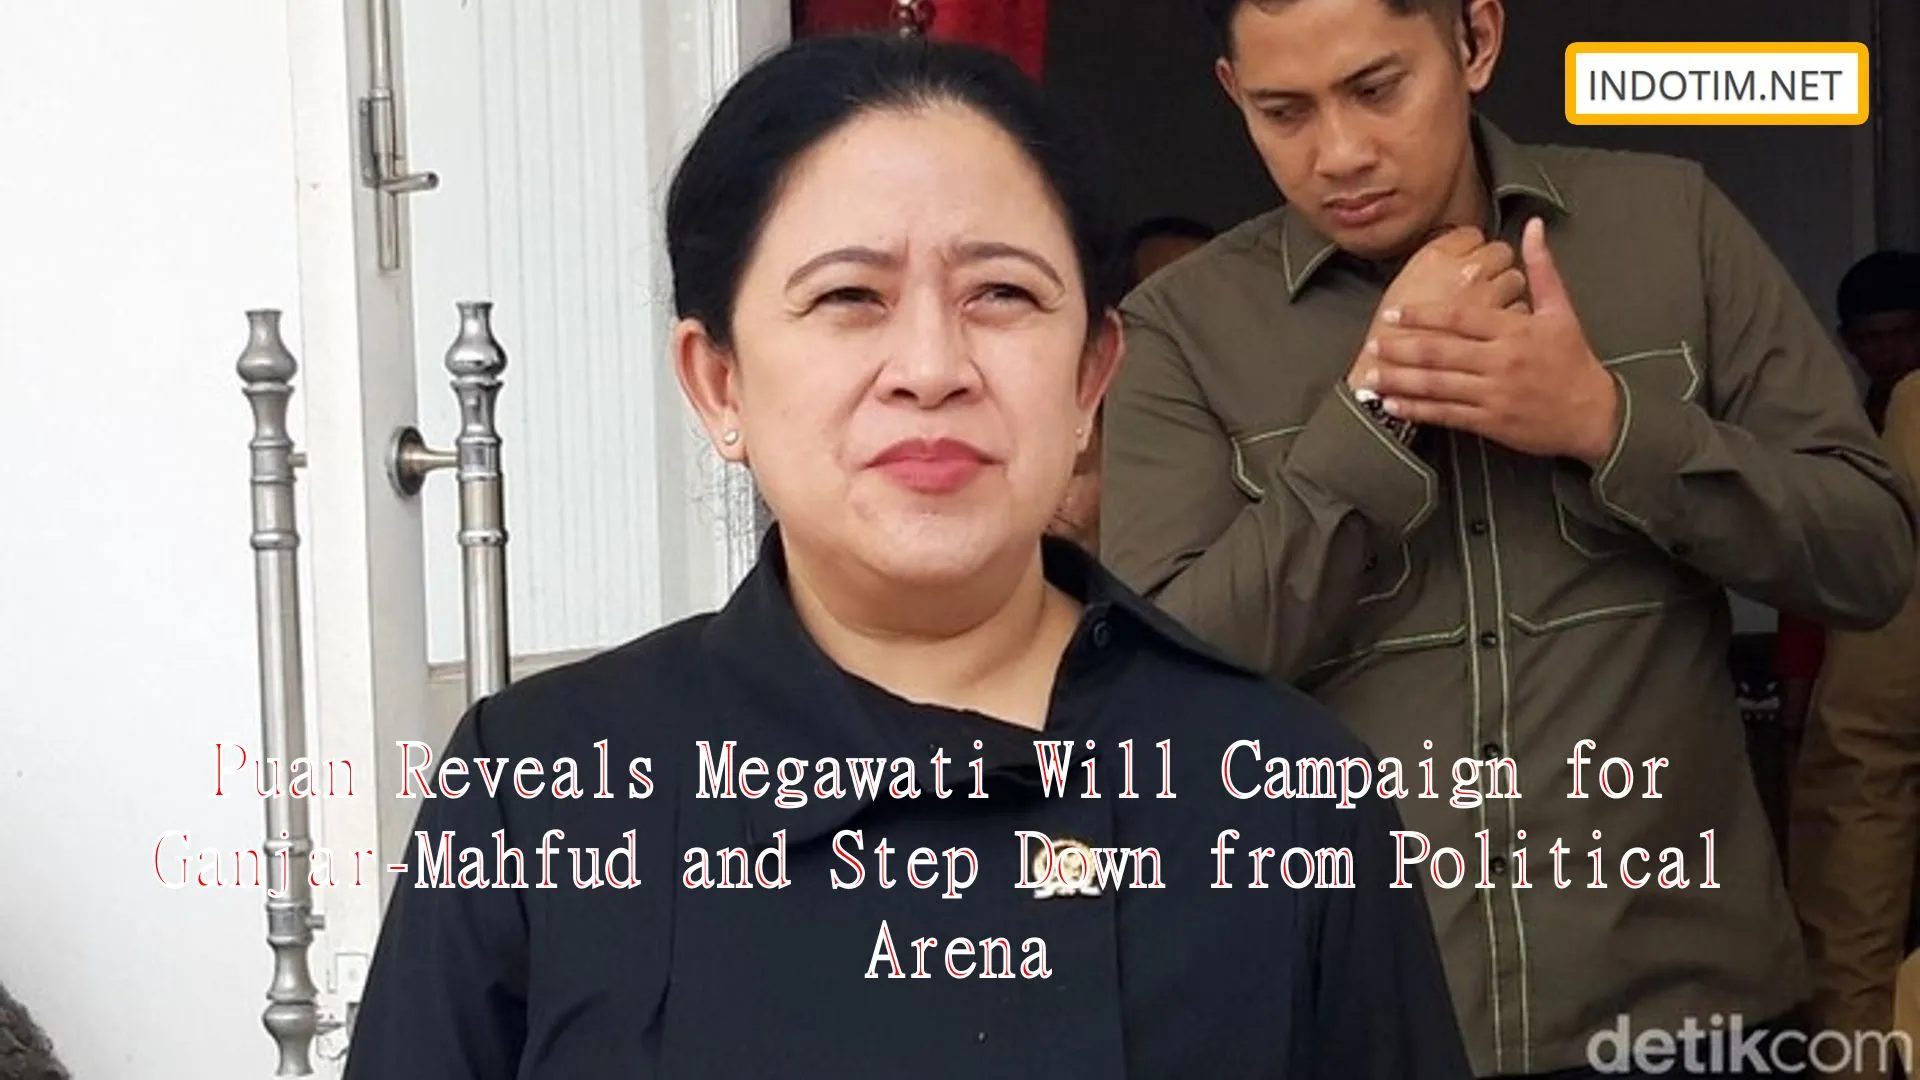 Puan Reveals Megawati Will Campaign for Ganjar-Mahfud and Step Down from Political Arena